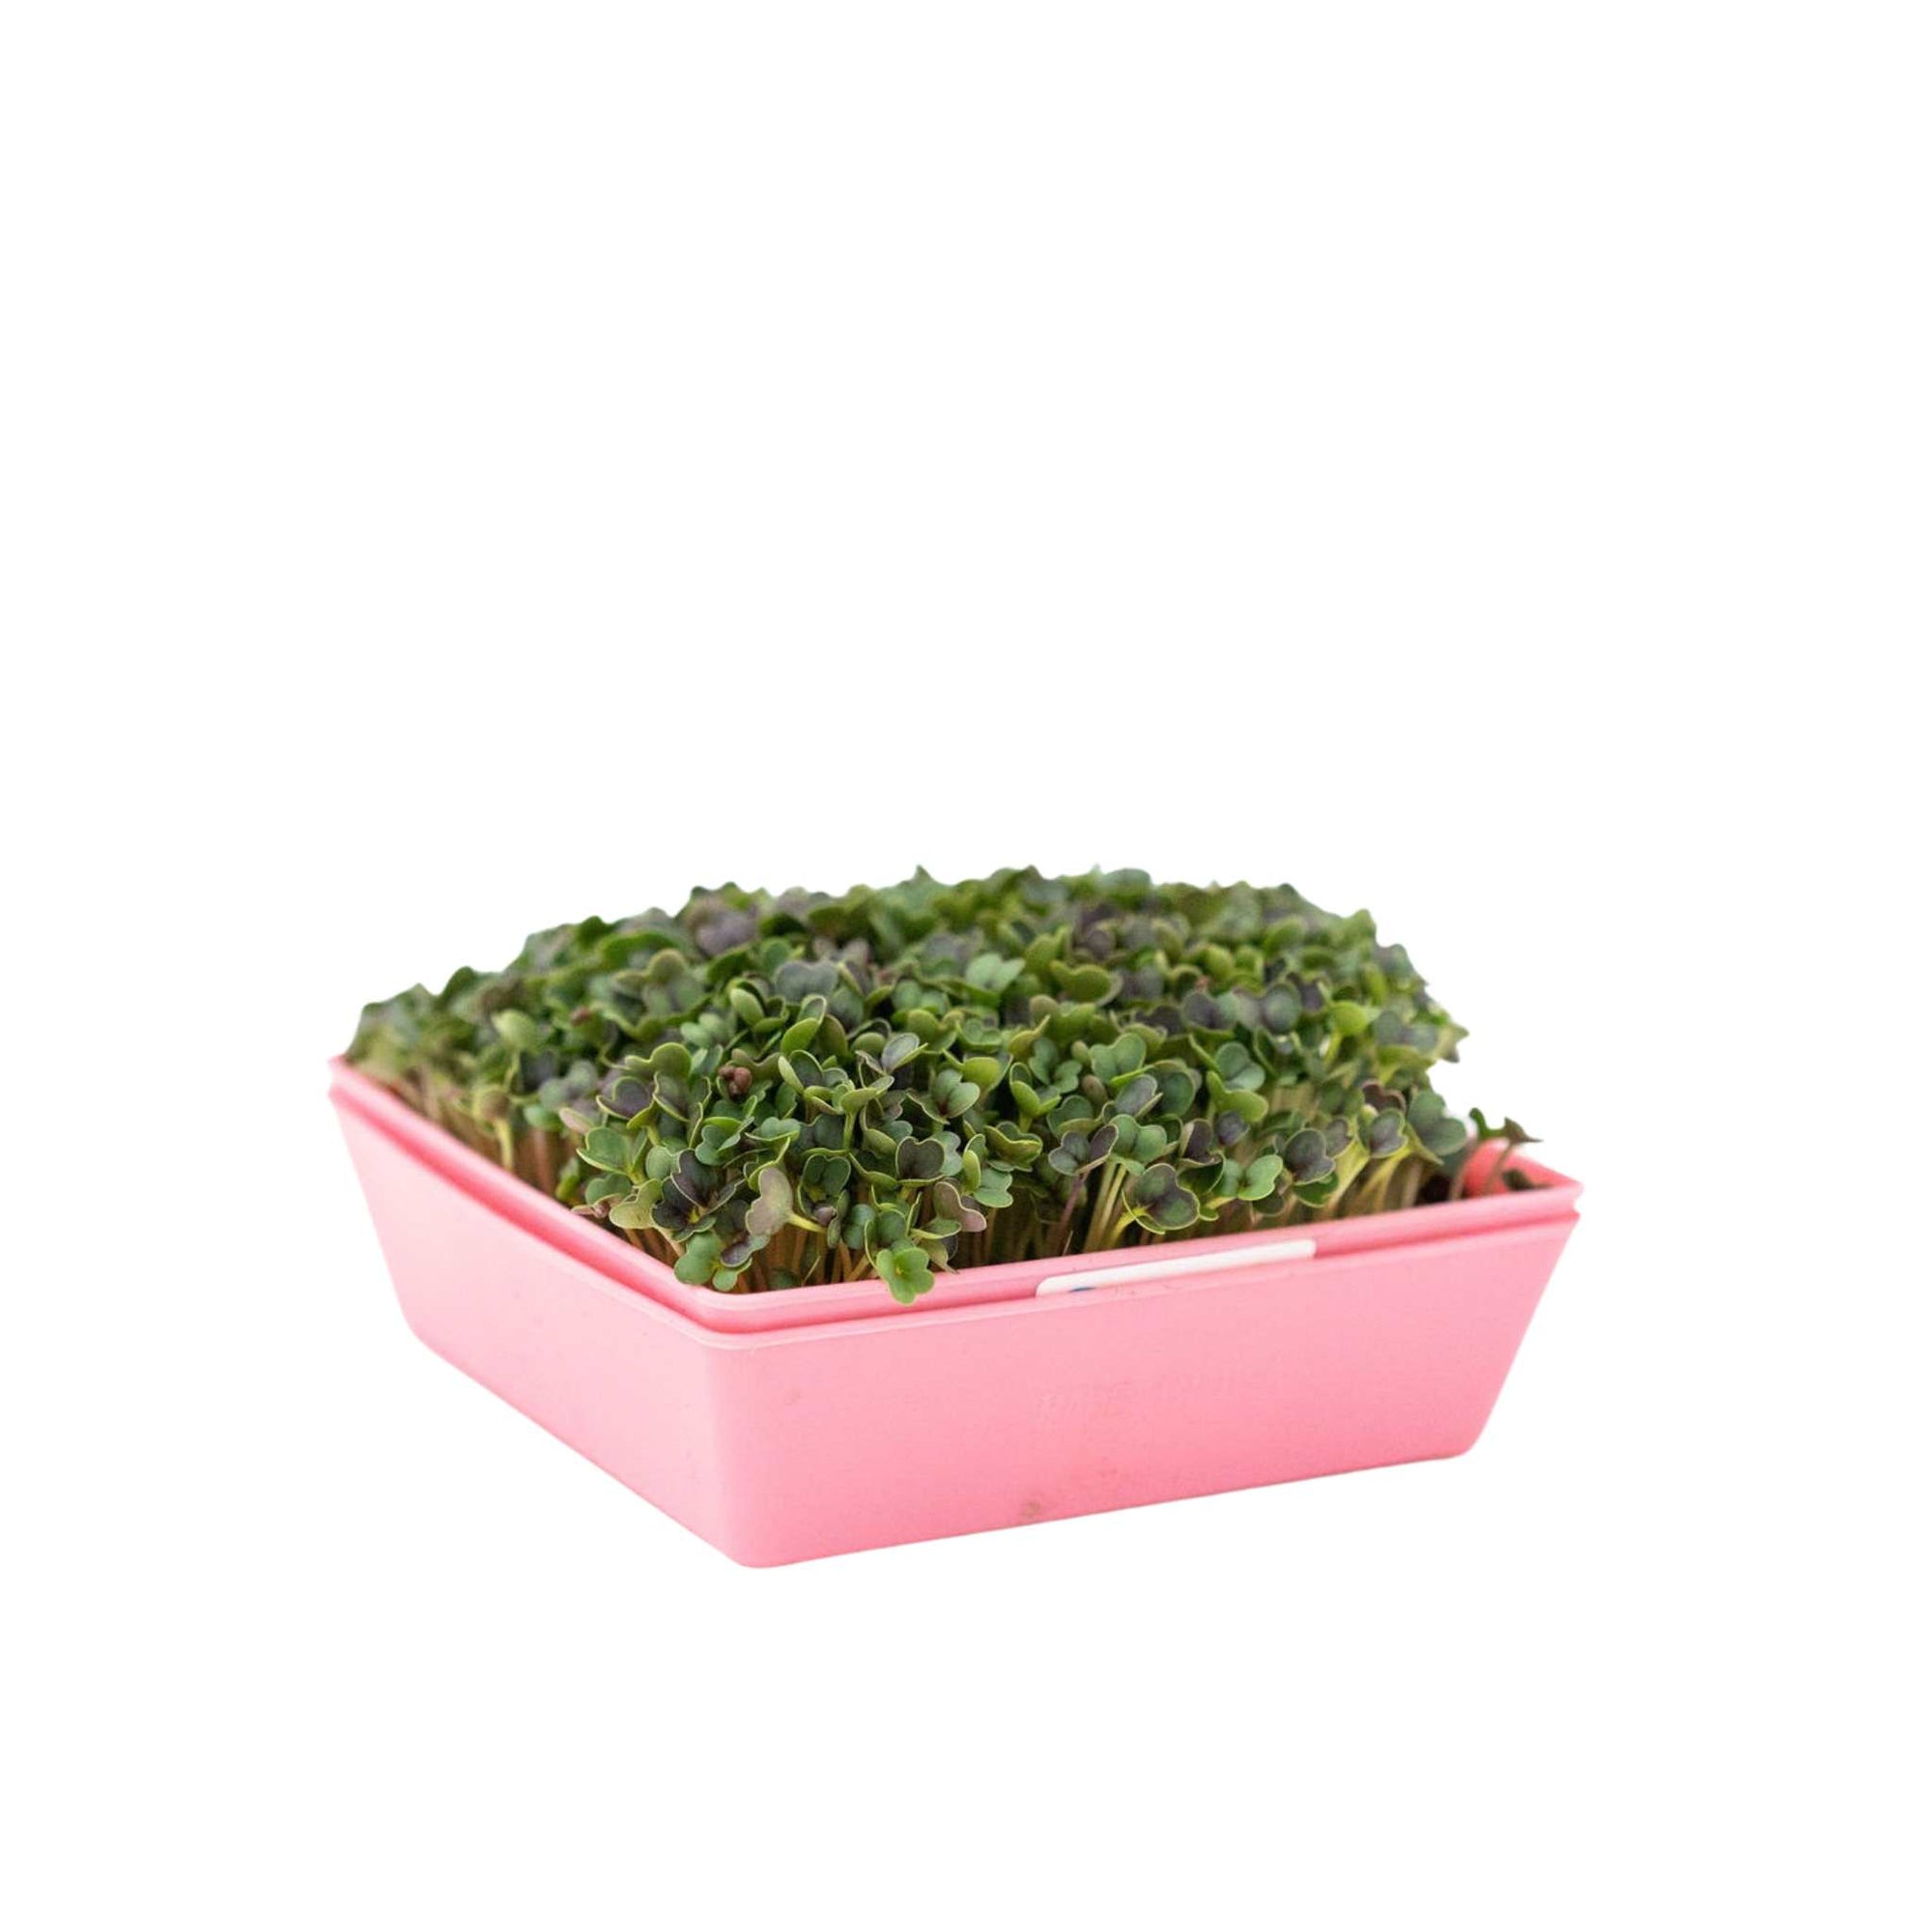 Pink shallow 5x5 tray with and without holes stacked planted with microgreens